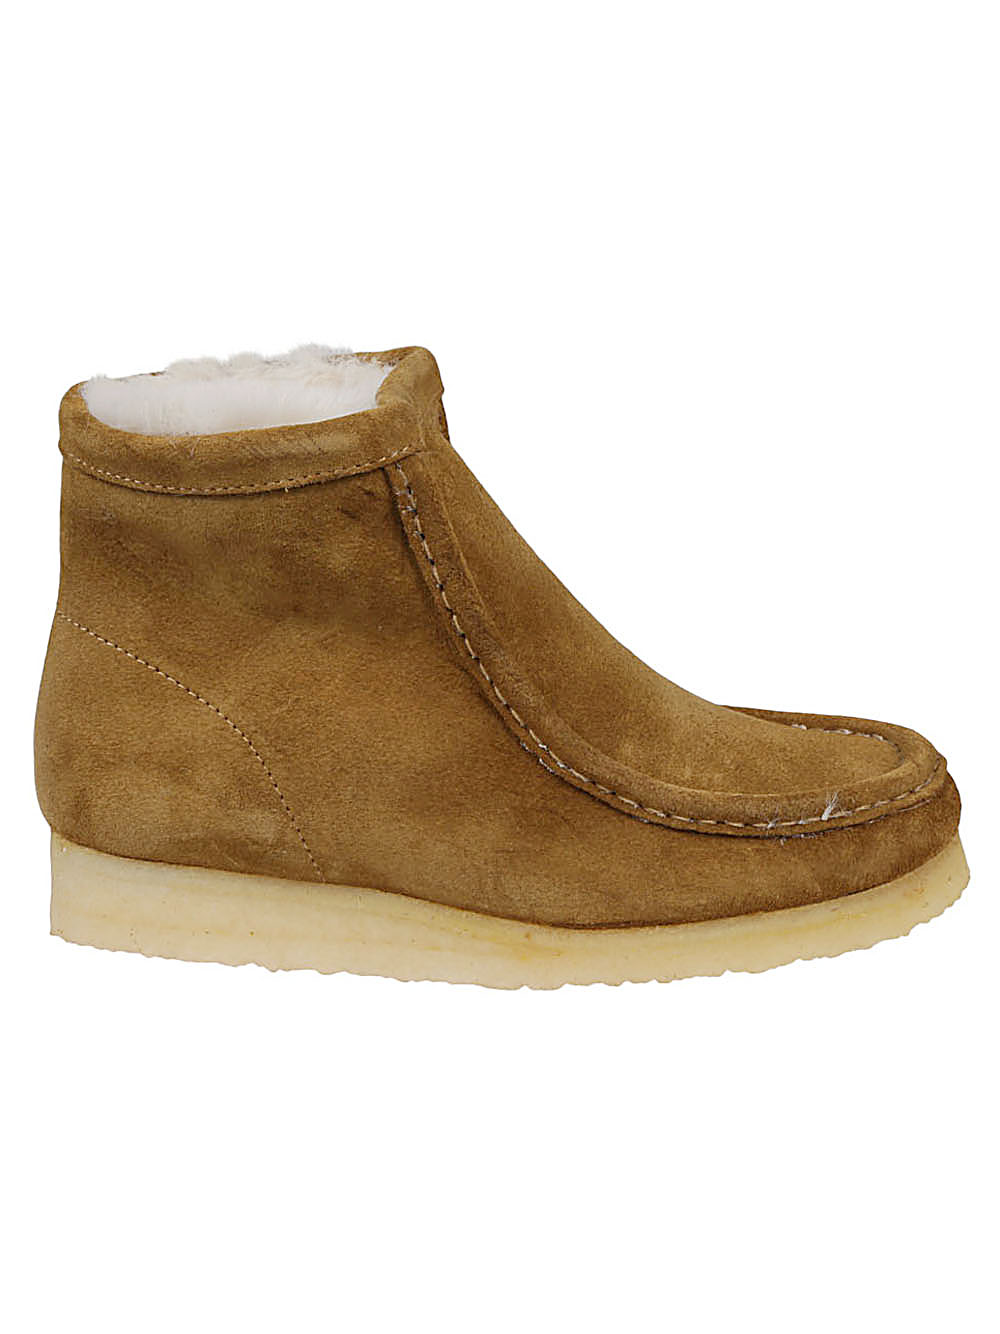 CLARKS CLARKS- Wallabee Hi Suede Leather Boots